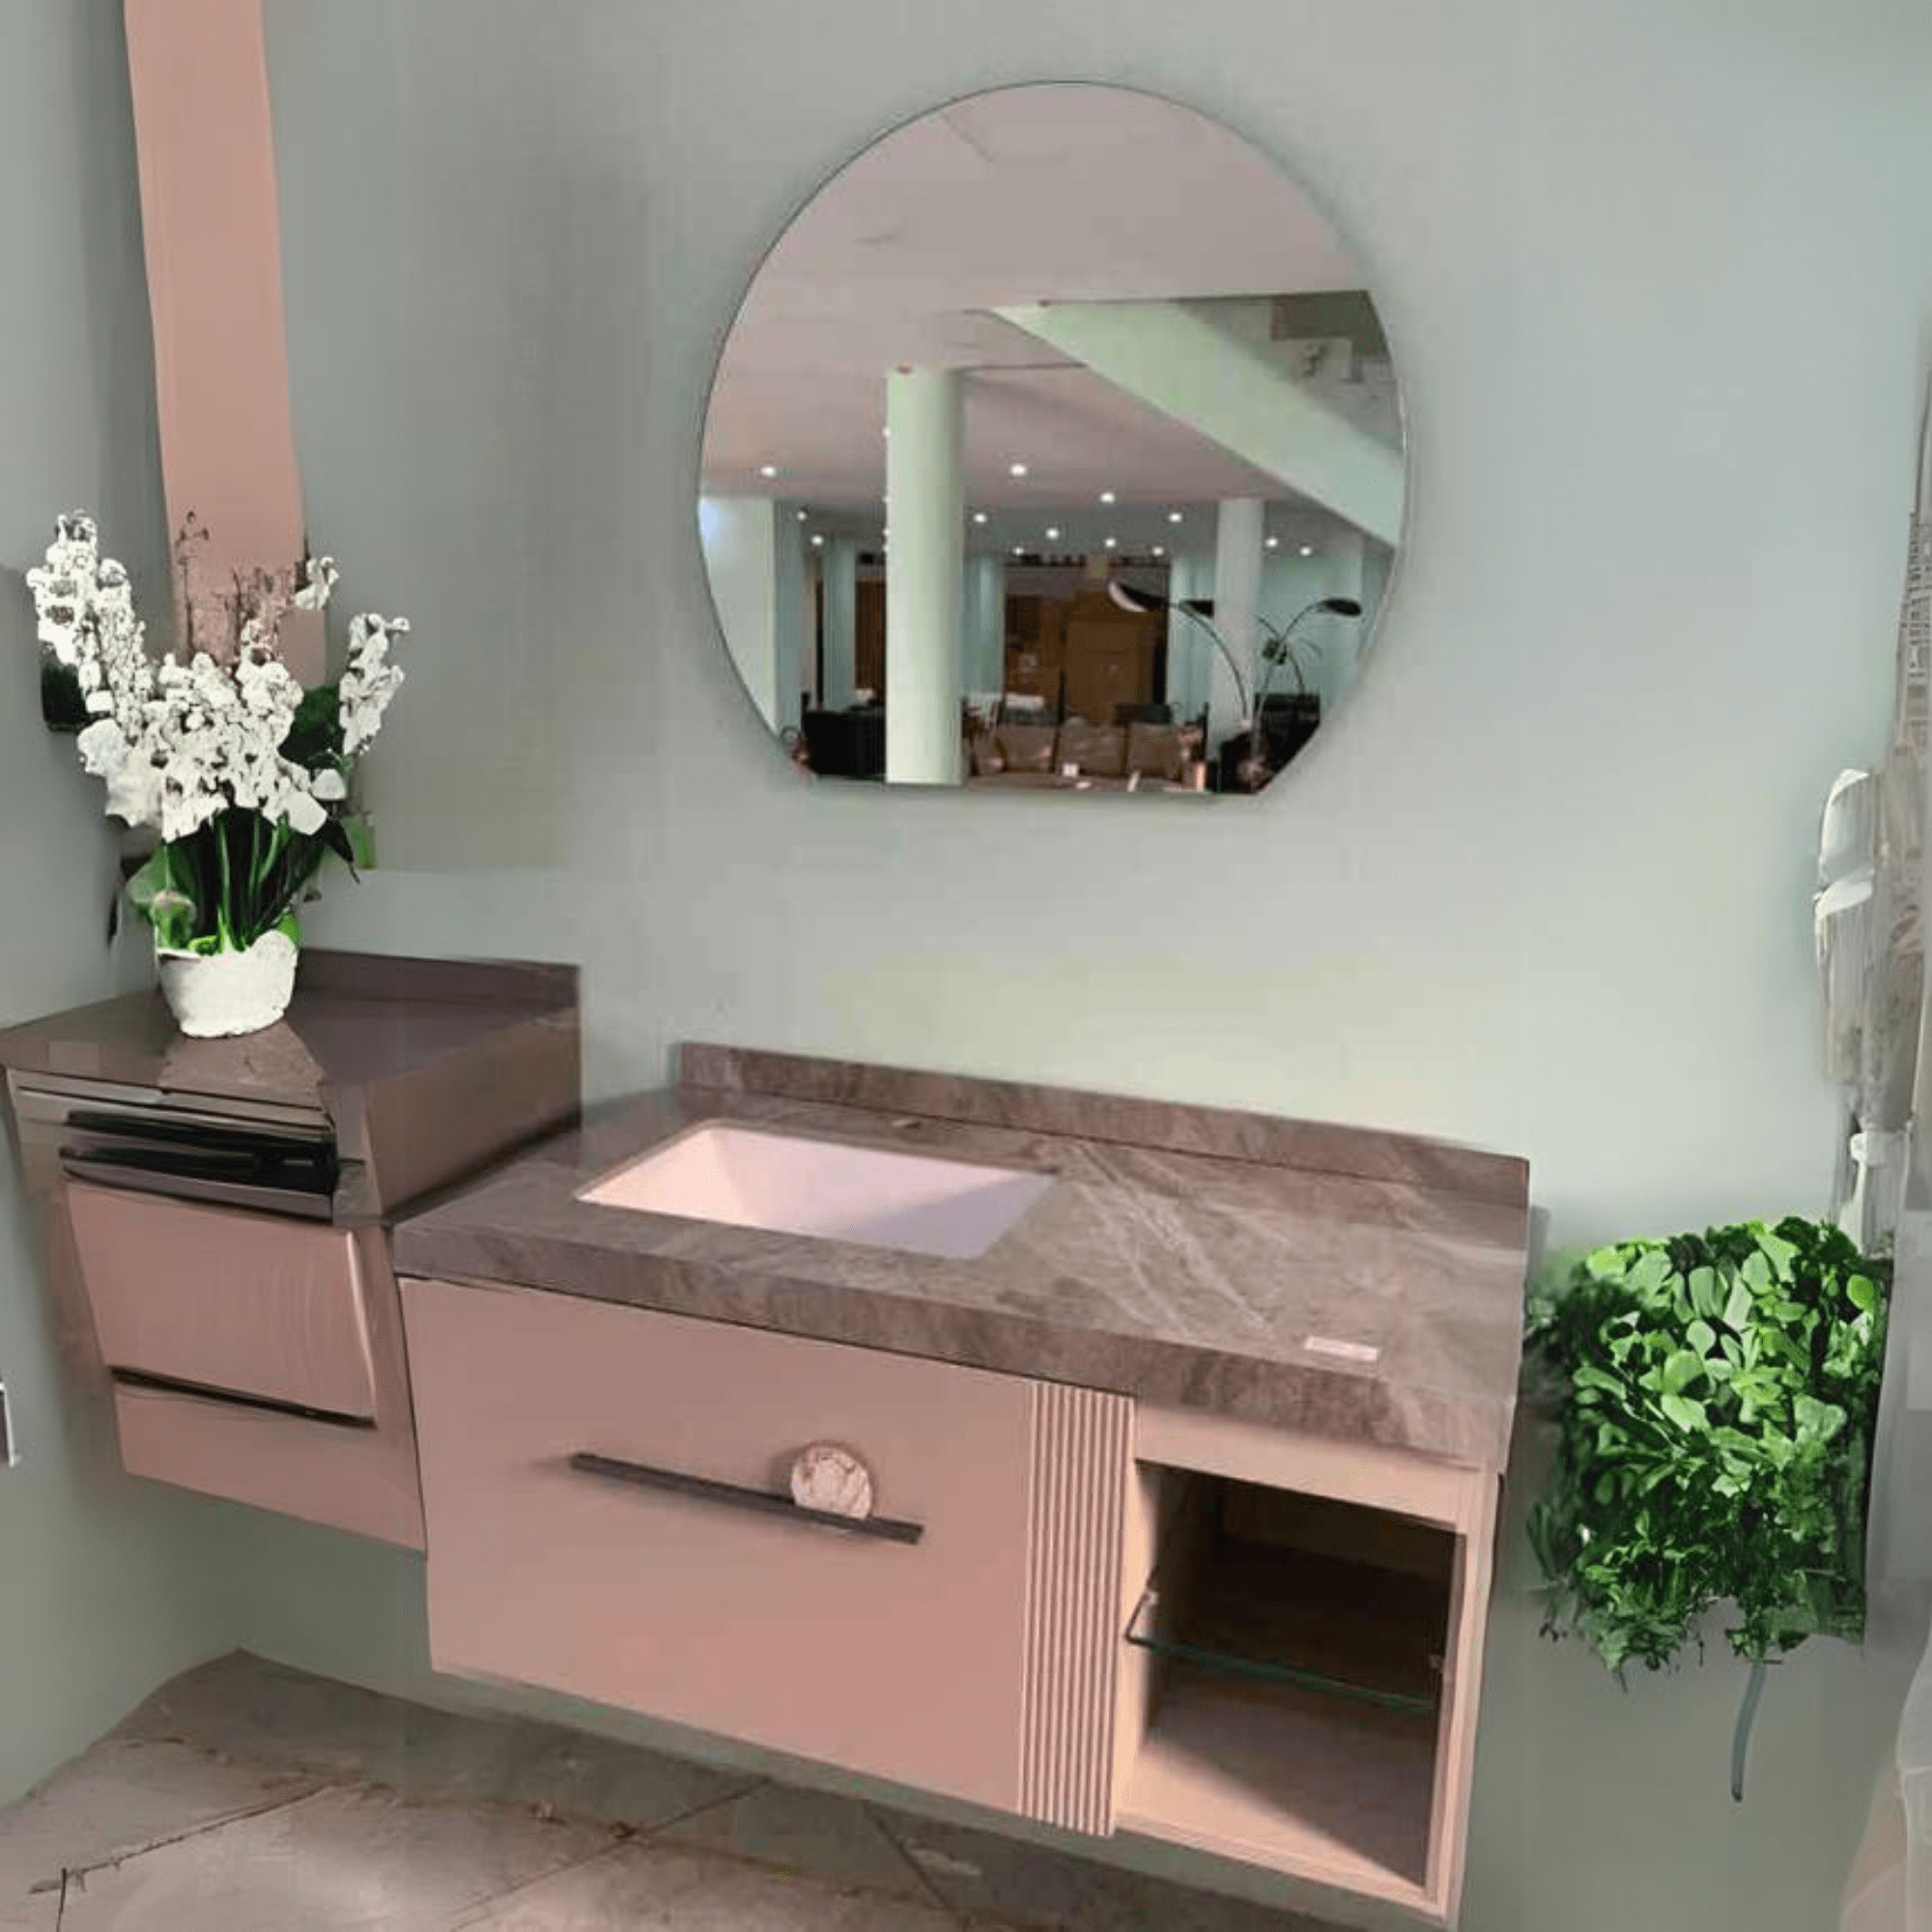 Buy Bathroom Luxury 100cm Wall-Mounted Vanity Cabinet with Mirror - E37 | Shop at Supply Master Accra, Ghana Bathroom Vanity & Cabinets Buy Tools hardware Building materials